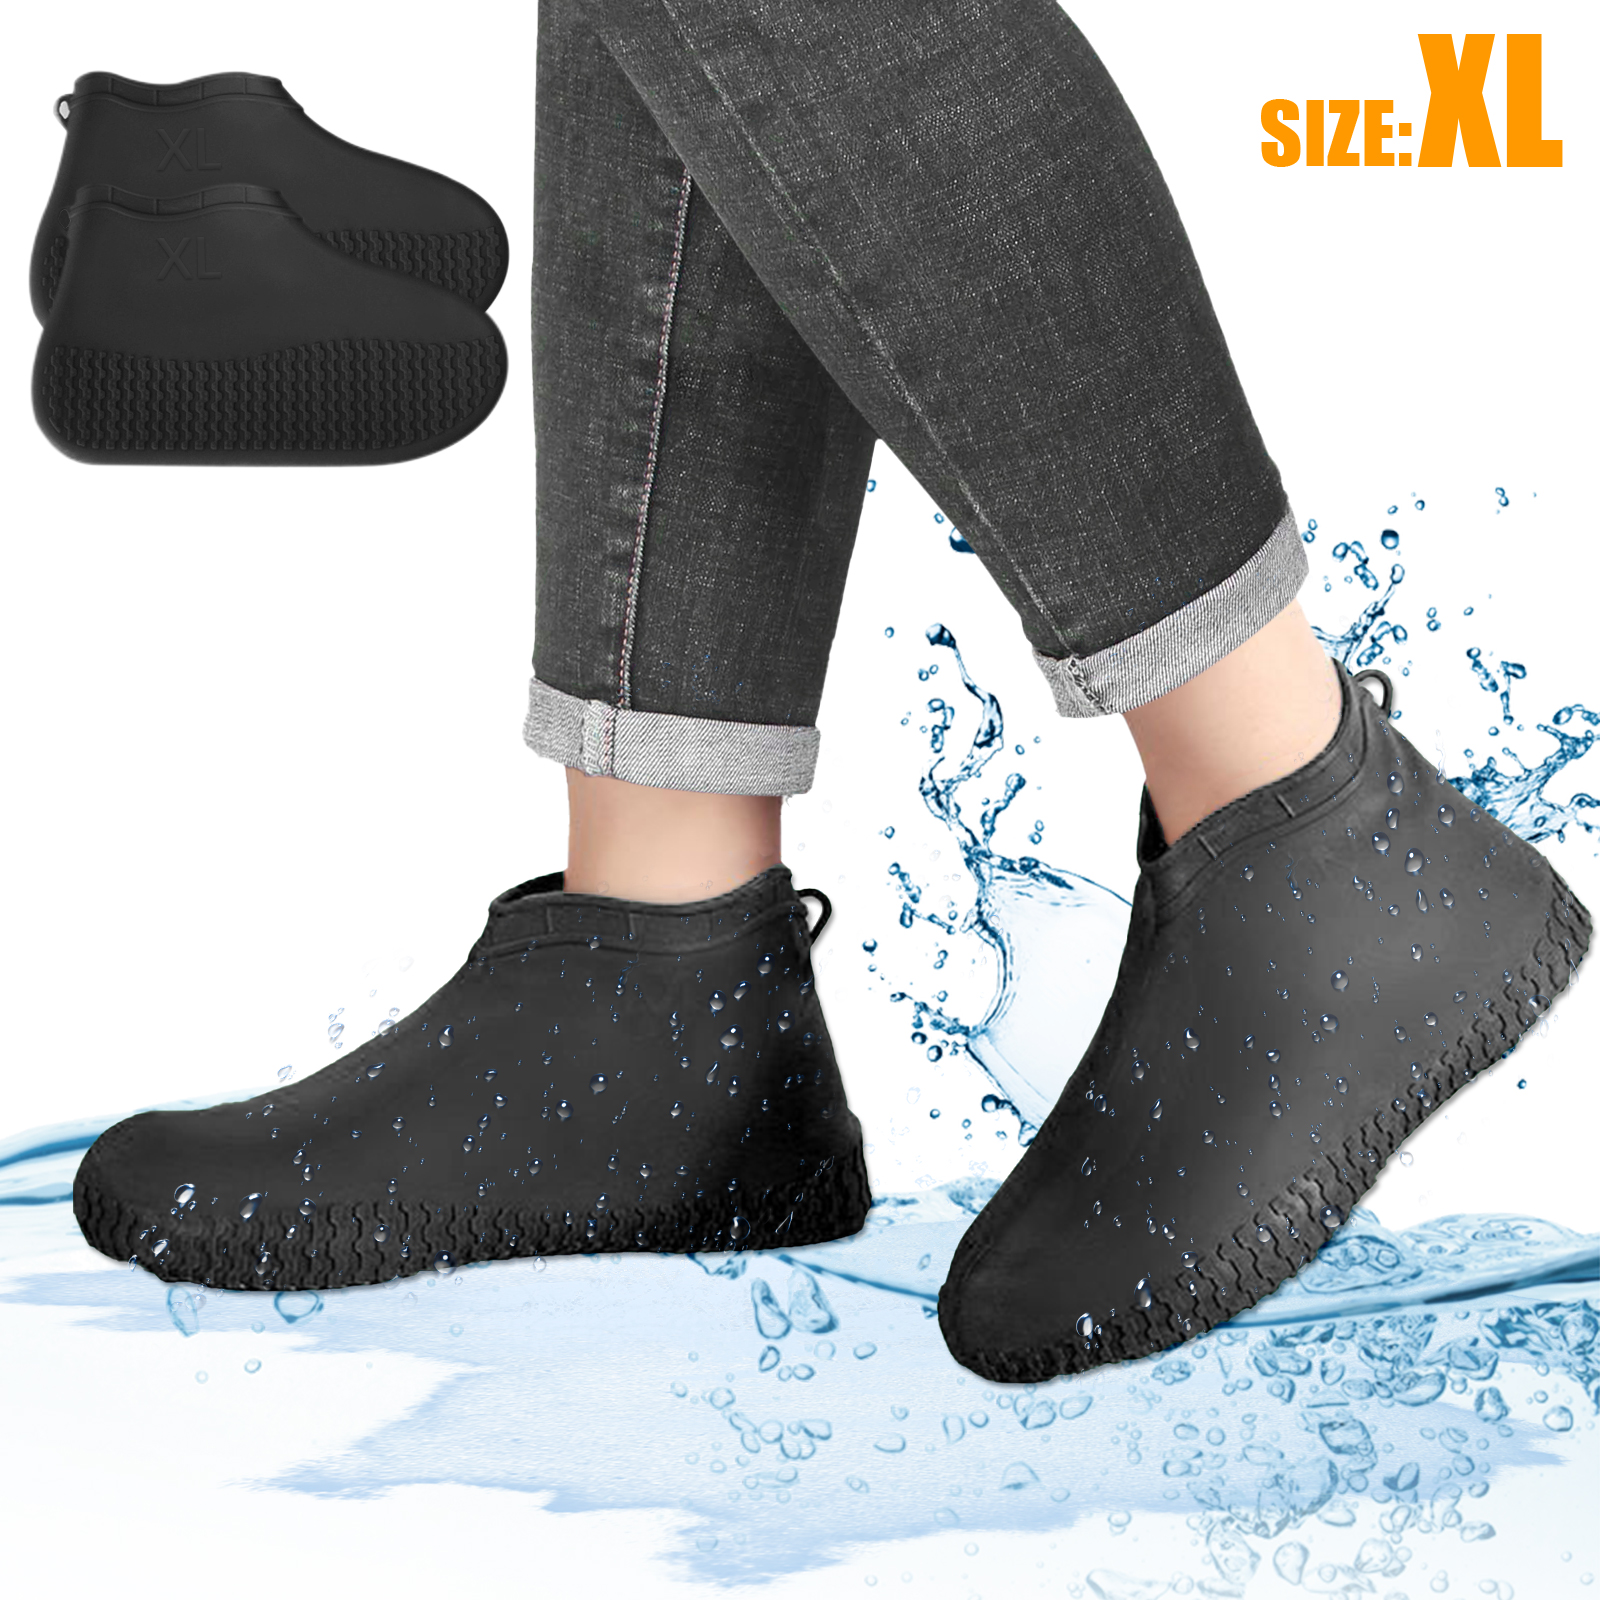 Silicone Anti-Slip Rain Shoe Reusable Waterproof Shoes Protector Cover 